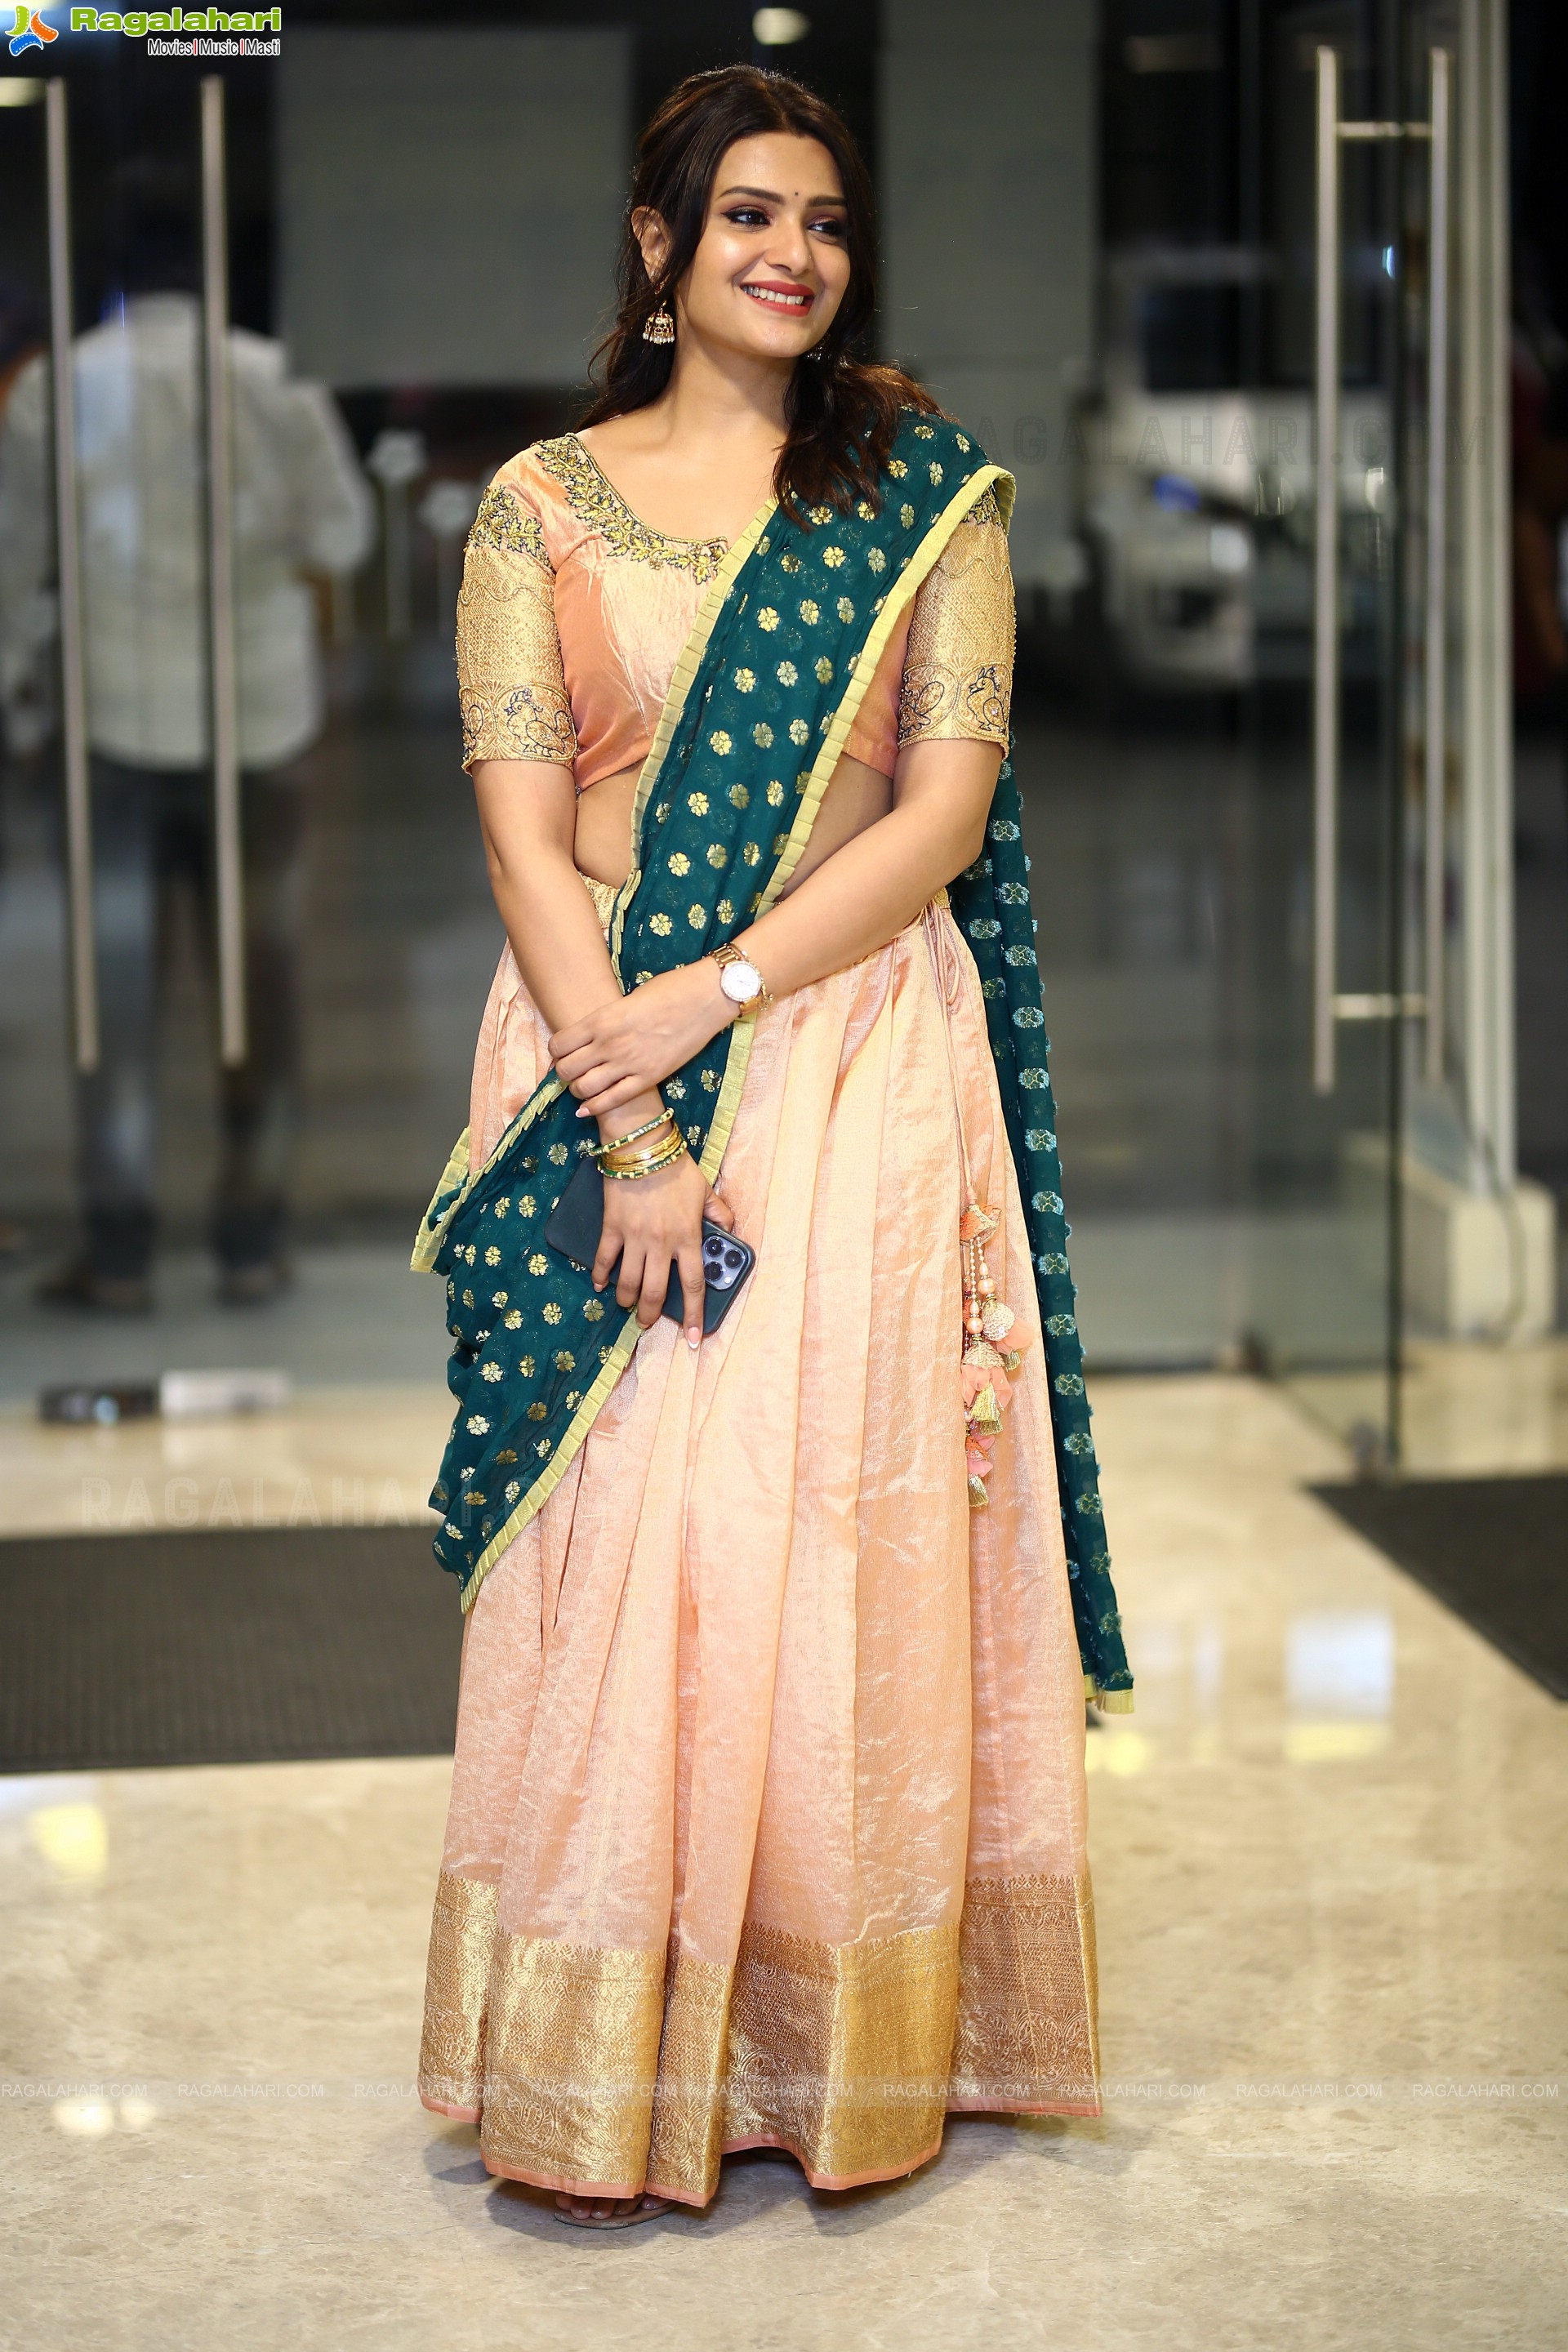 Divya Pillai at Thaggede Le Movie Pre-Release Event, HD Photo Gallery